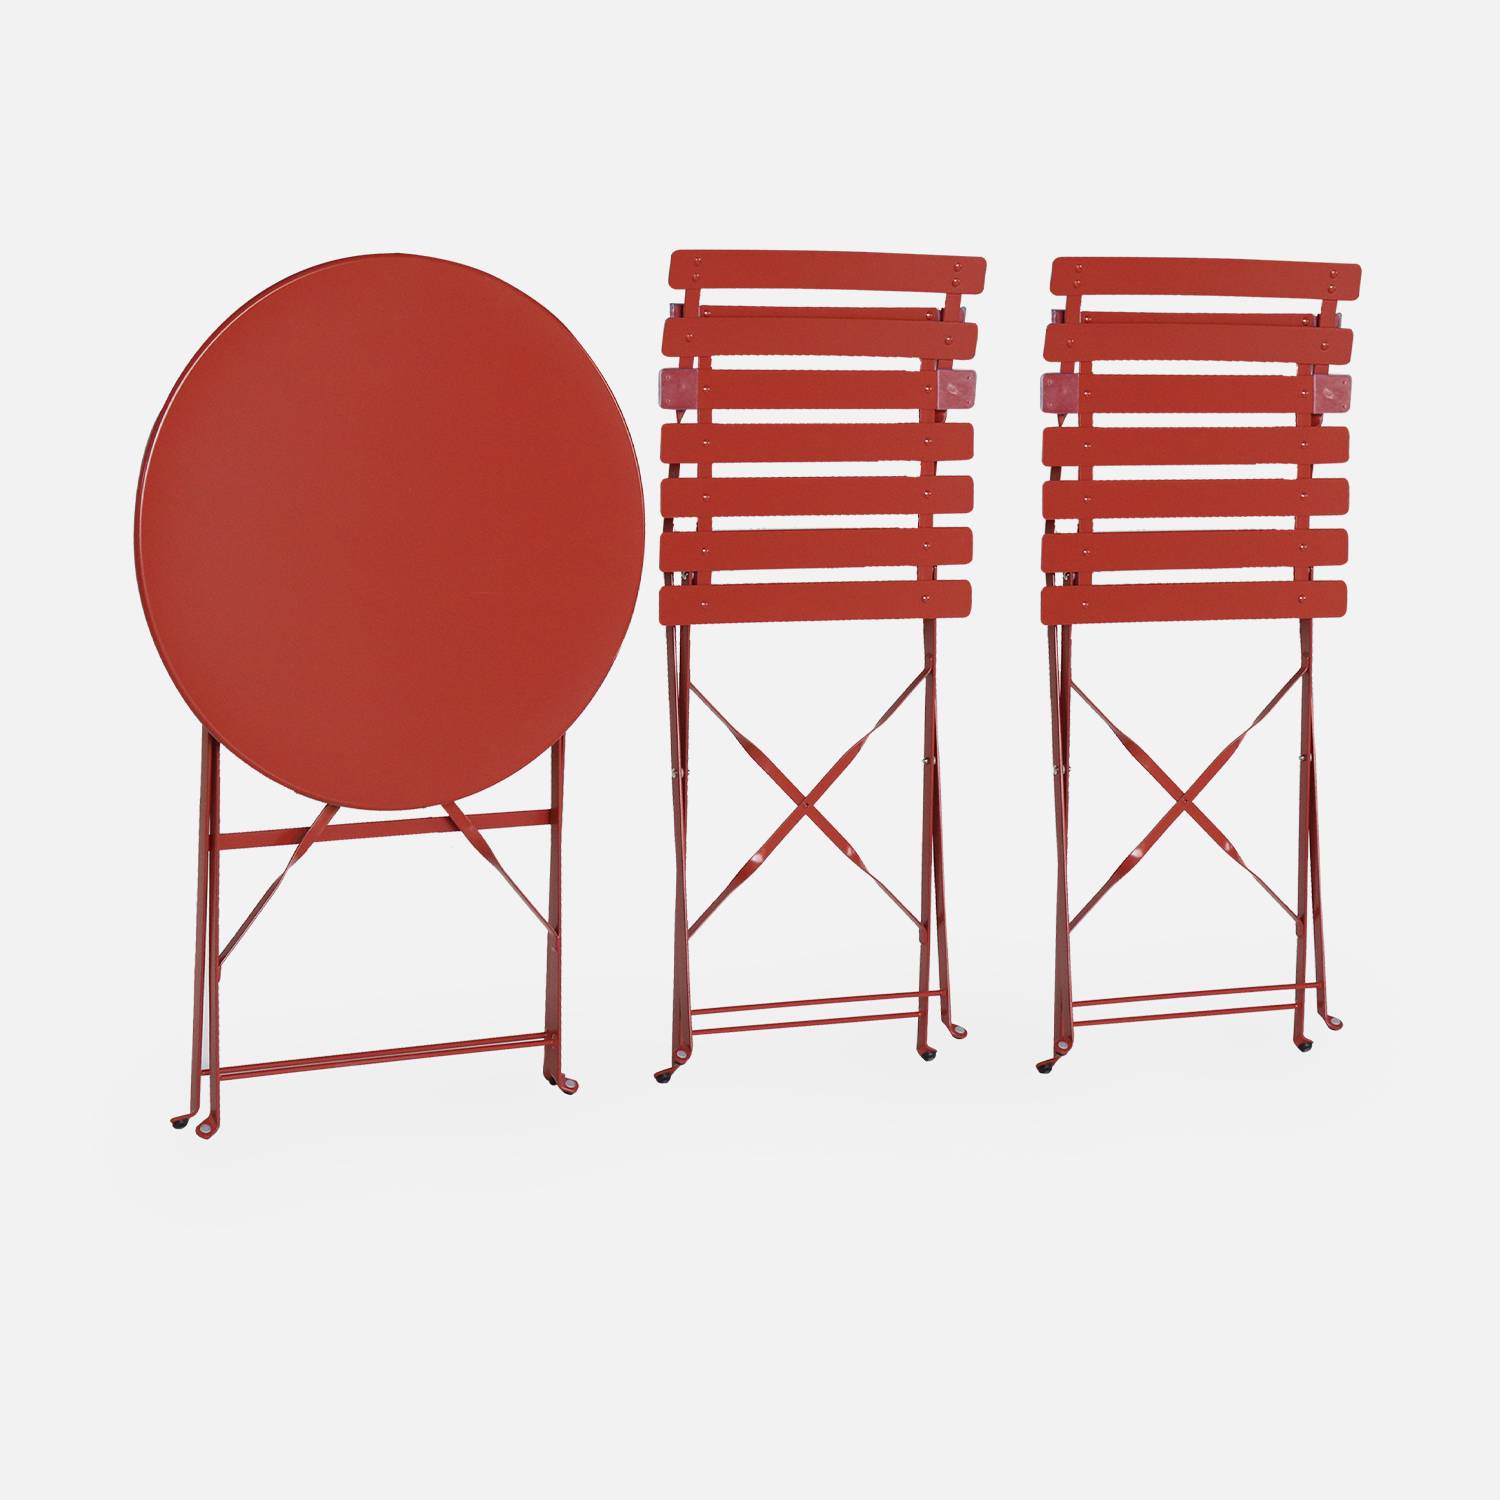 2-seater foldable thermo-lacquered steel bistro garden table with chairs, Ø60cm - Emilia - Terracotta Photo6